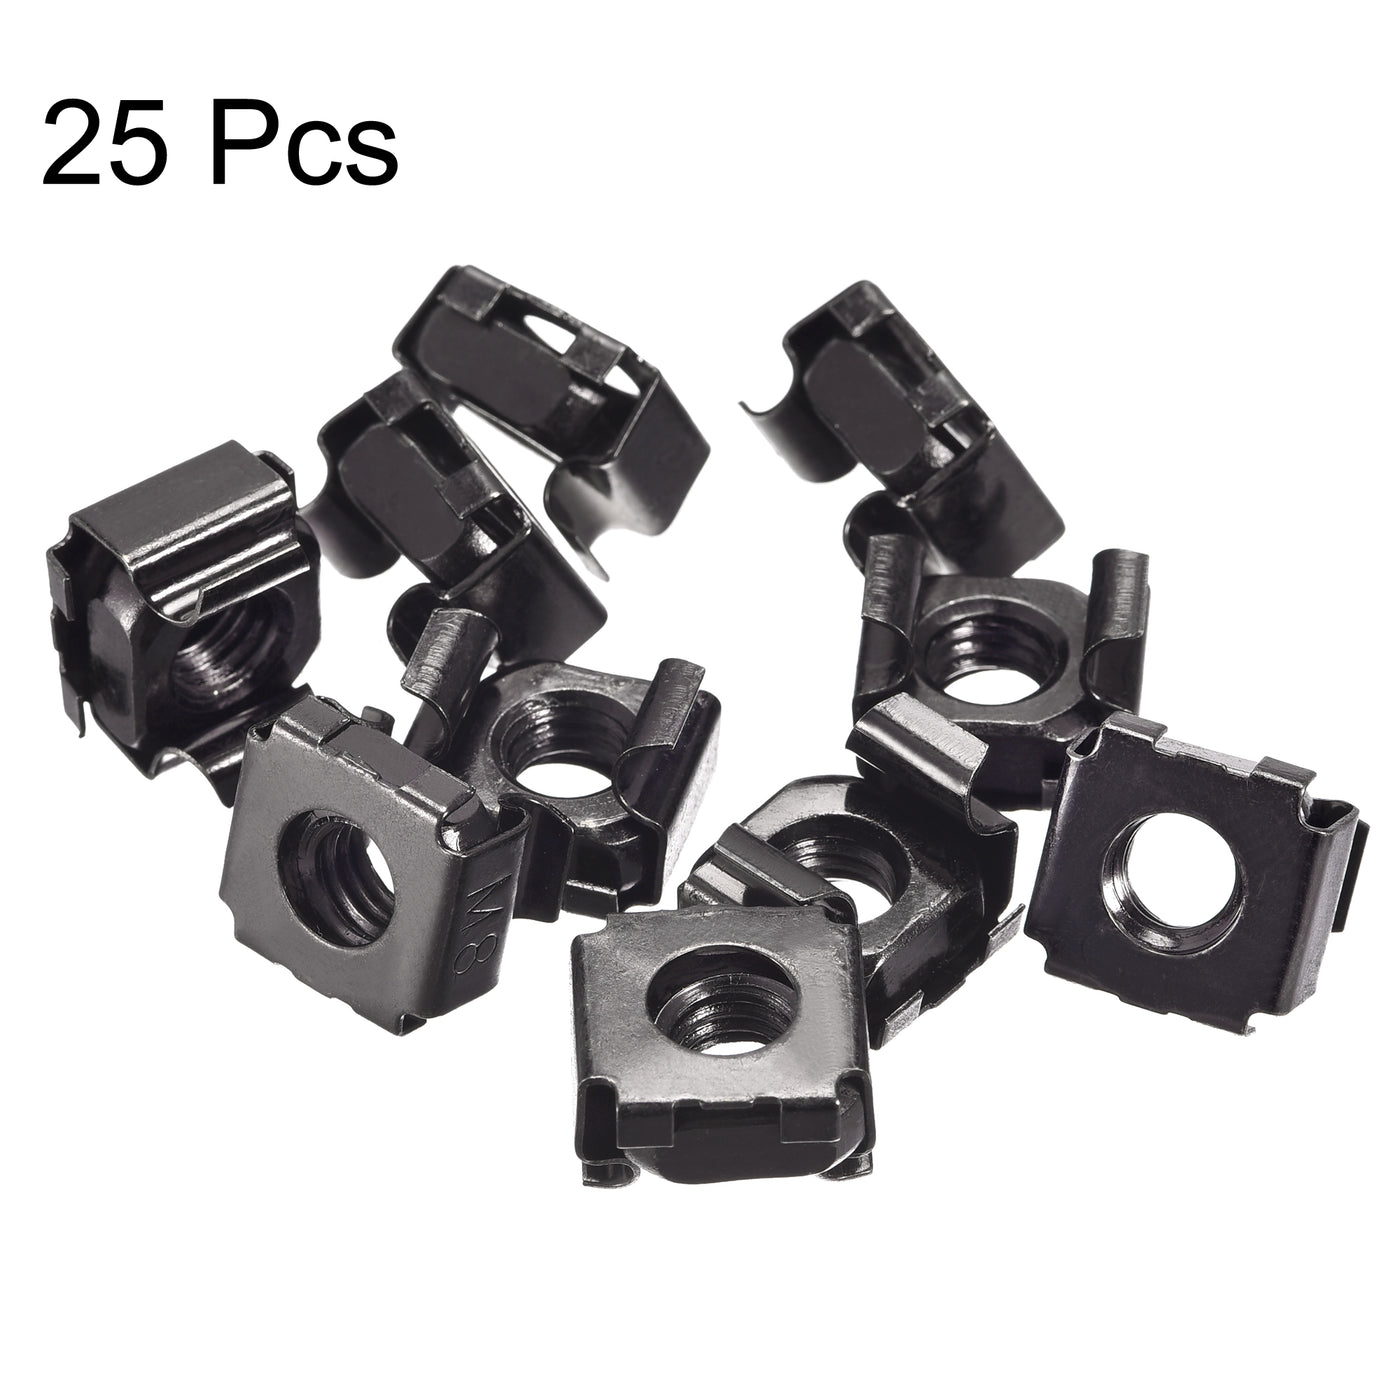 uxcell Uxcell Snap-in Cage Nuts Carbon Steel Nut for Server Shelve